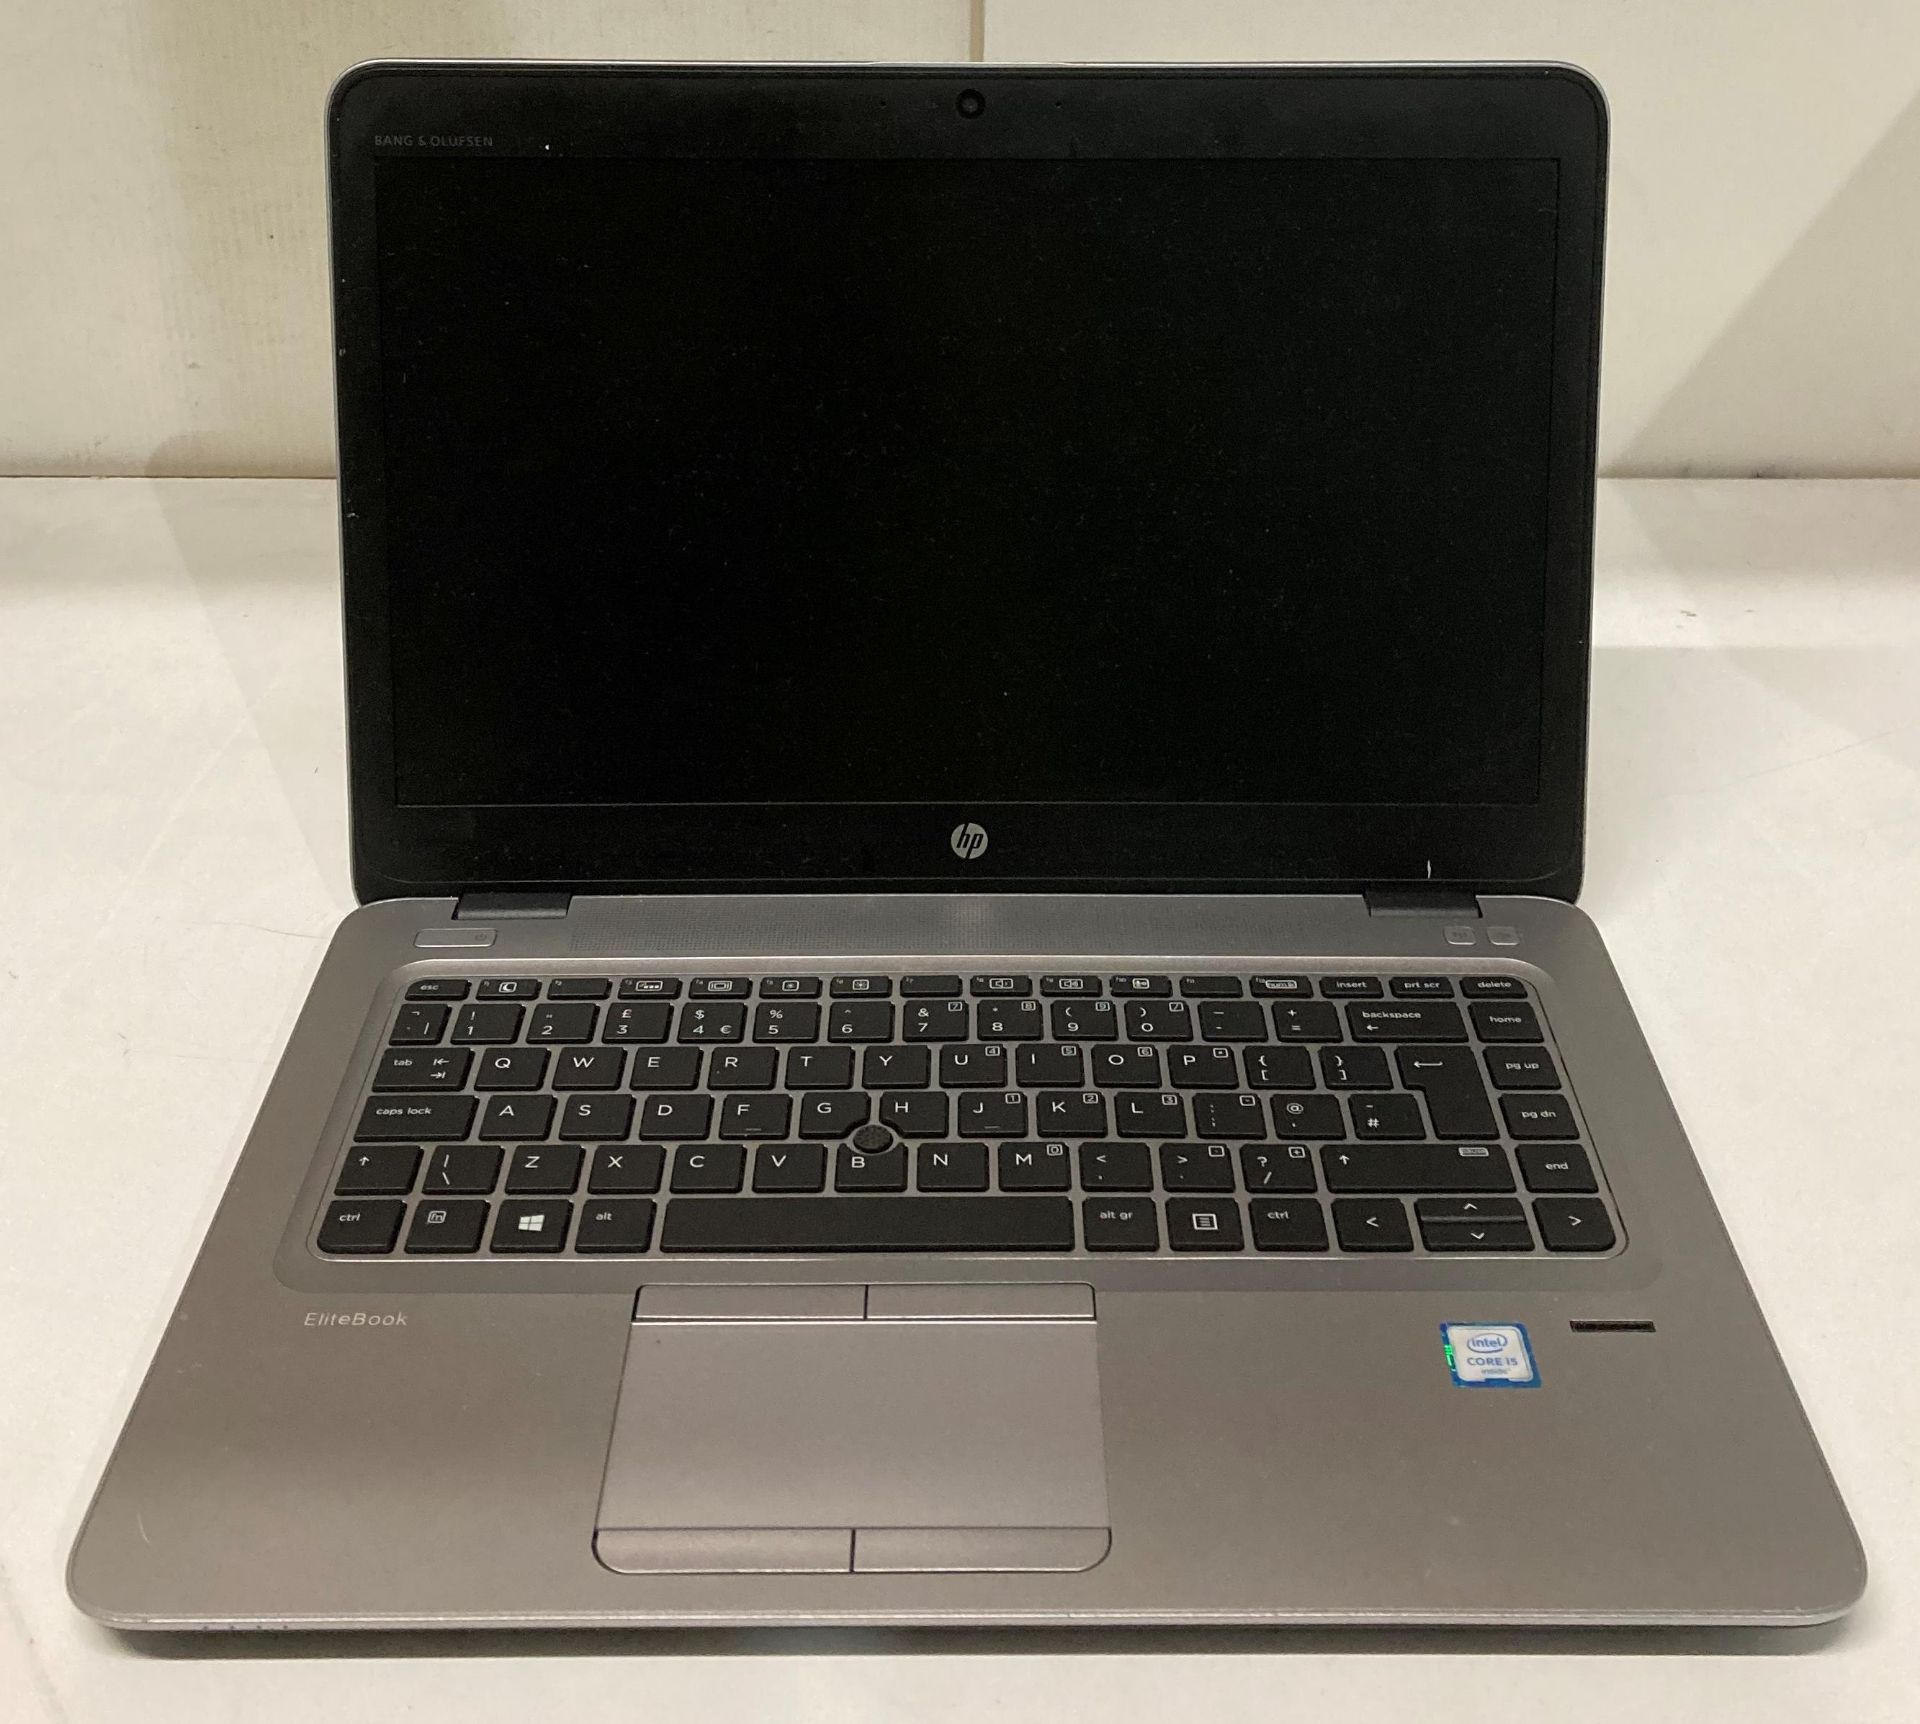 HP PrBook 840 G3 Core i5 laptop 8GB RAM, 500GB Hard Drive (no charger or power lead,